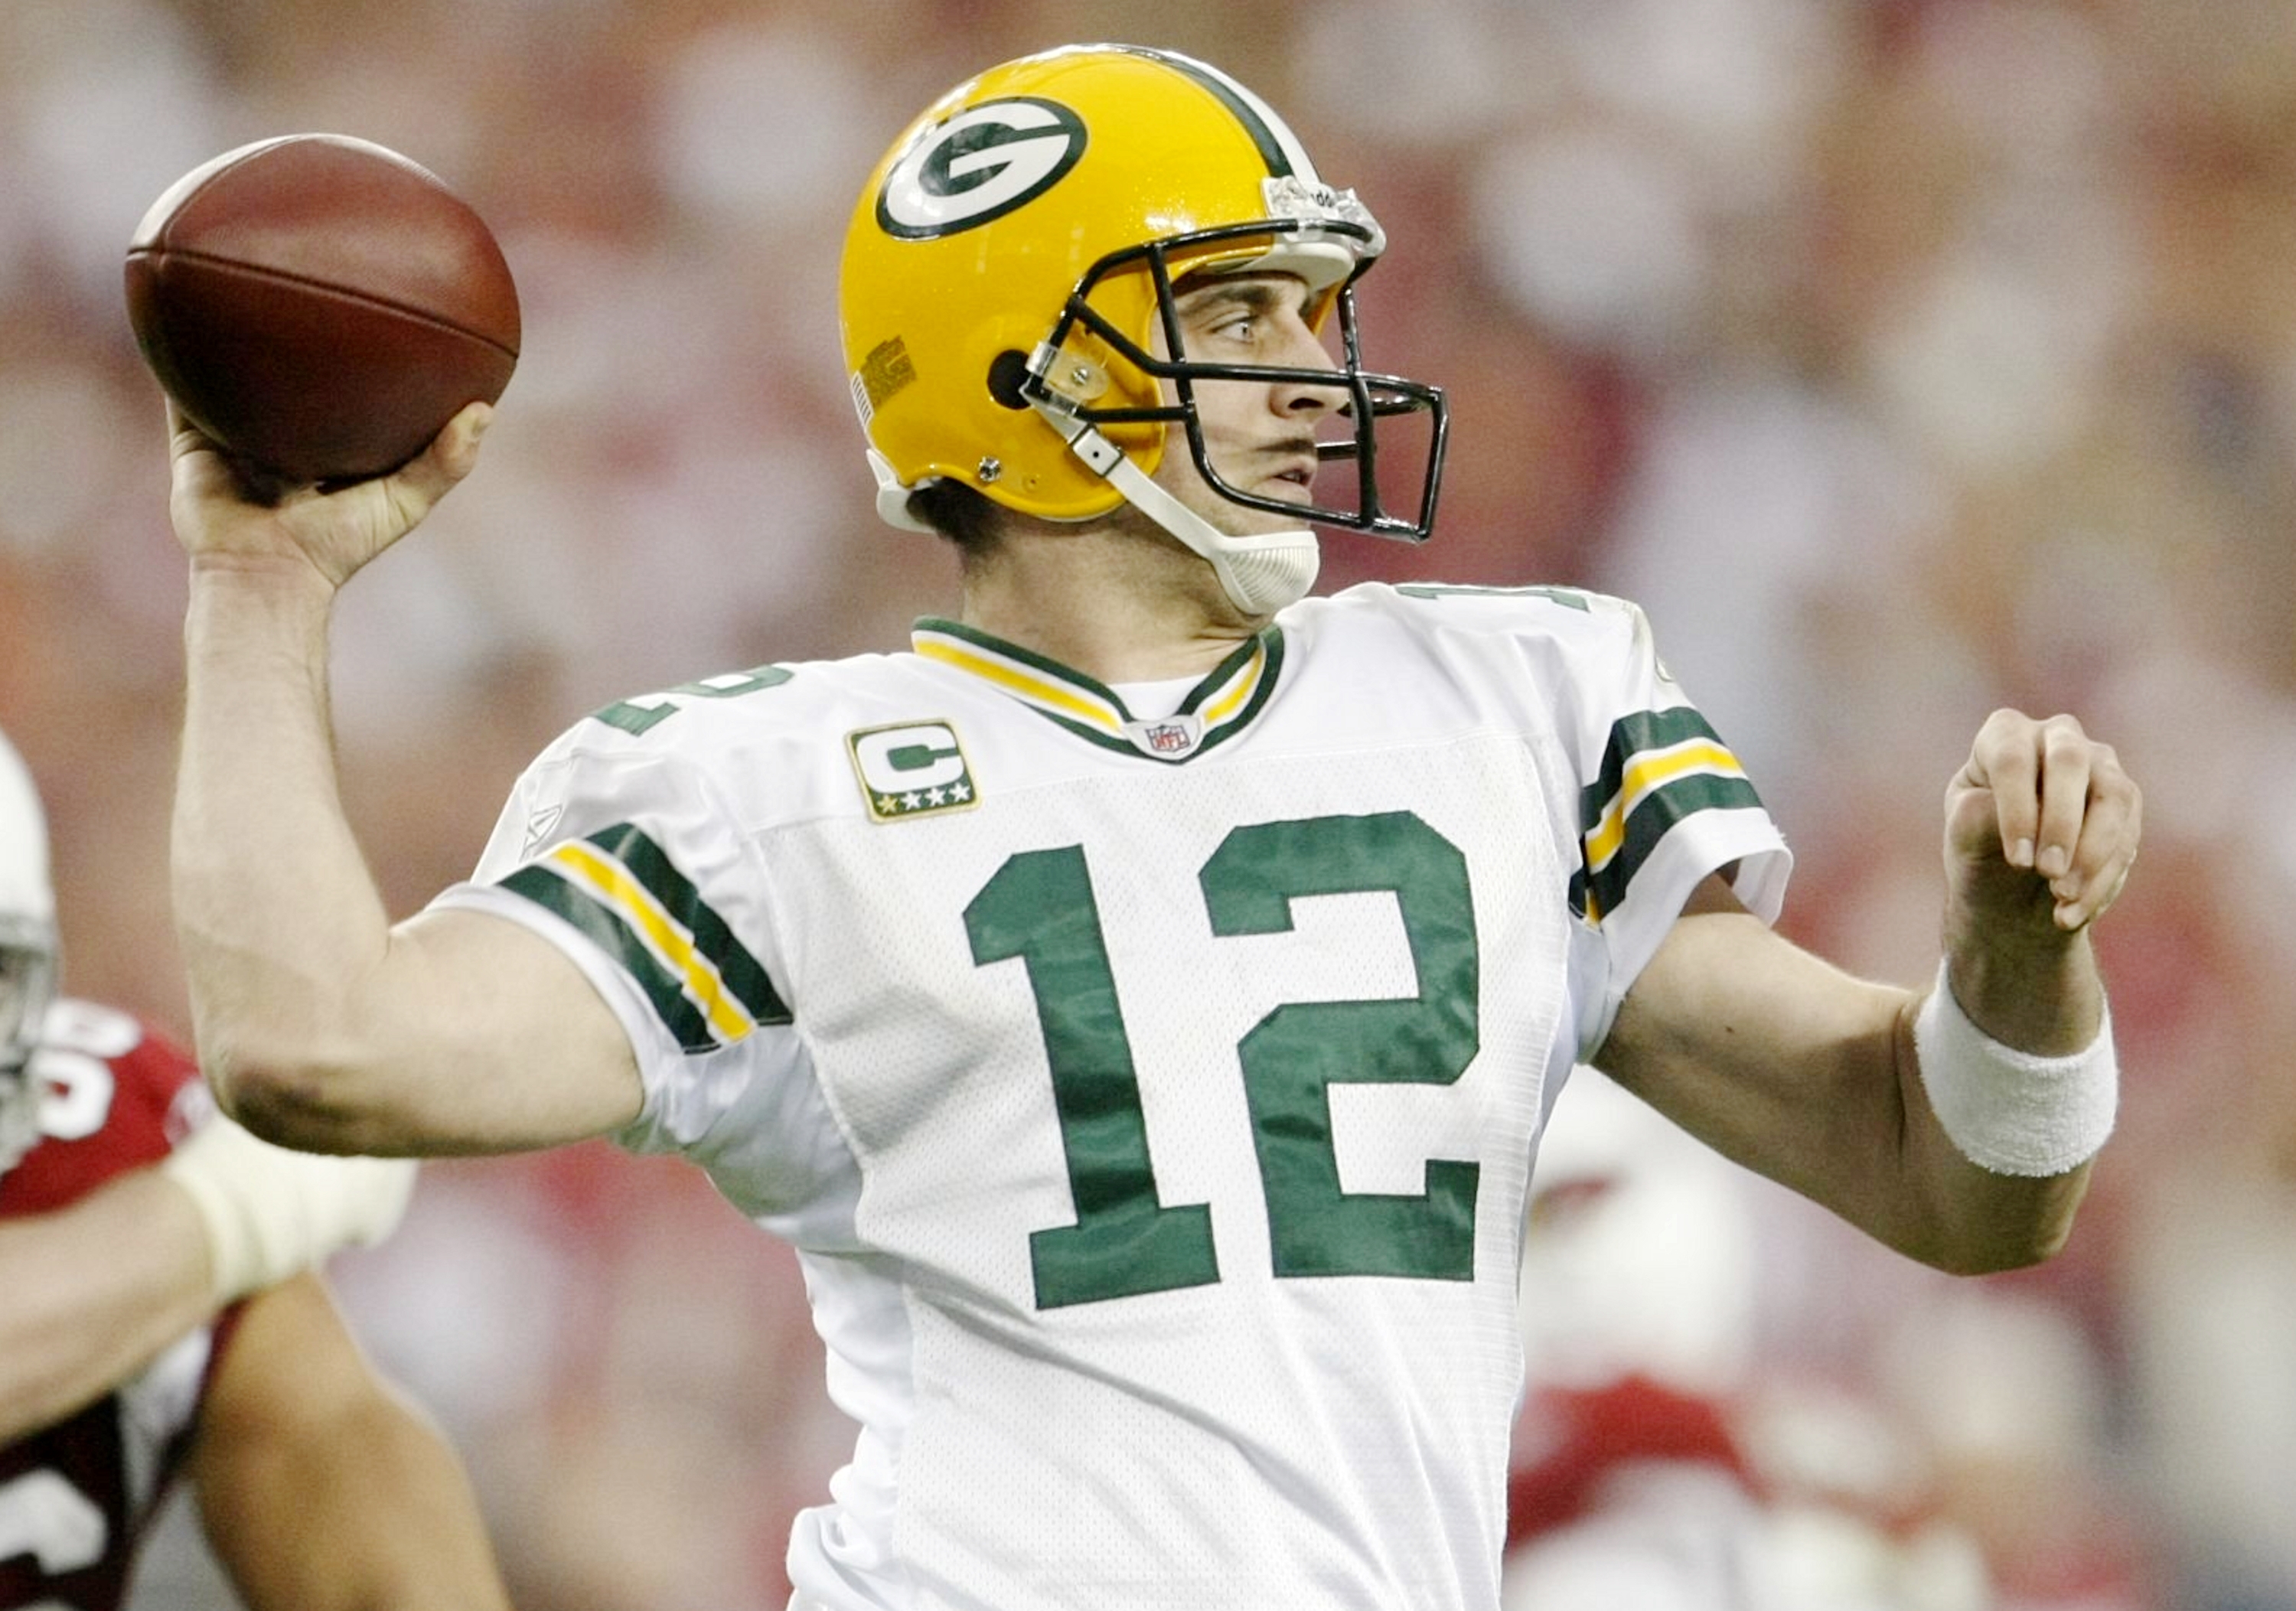 GLENDALE, AZ - JANUARY 10:  Quarterback Aaron Rodgers #12 of the Green Bay Packers throws a pass against the Arizona Cardinals during the 2010 NFC wild-card playoff game at University of Phoenix Stadium on January 10, 2010 in Glendale, Arizona.   (Photo b